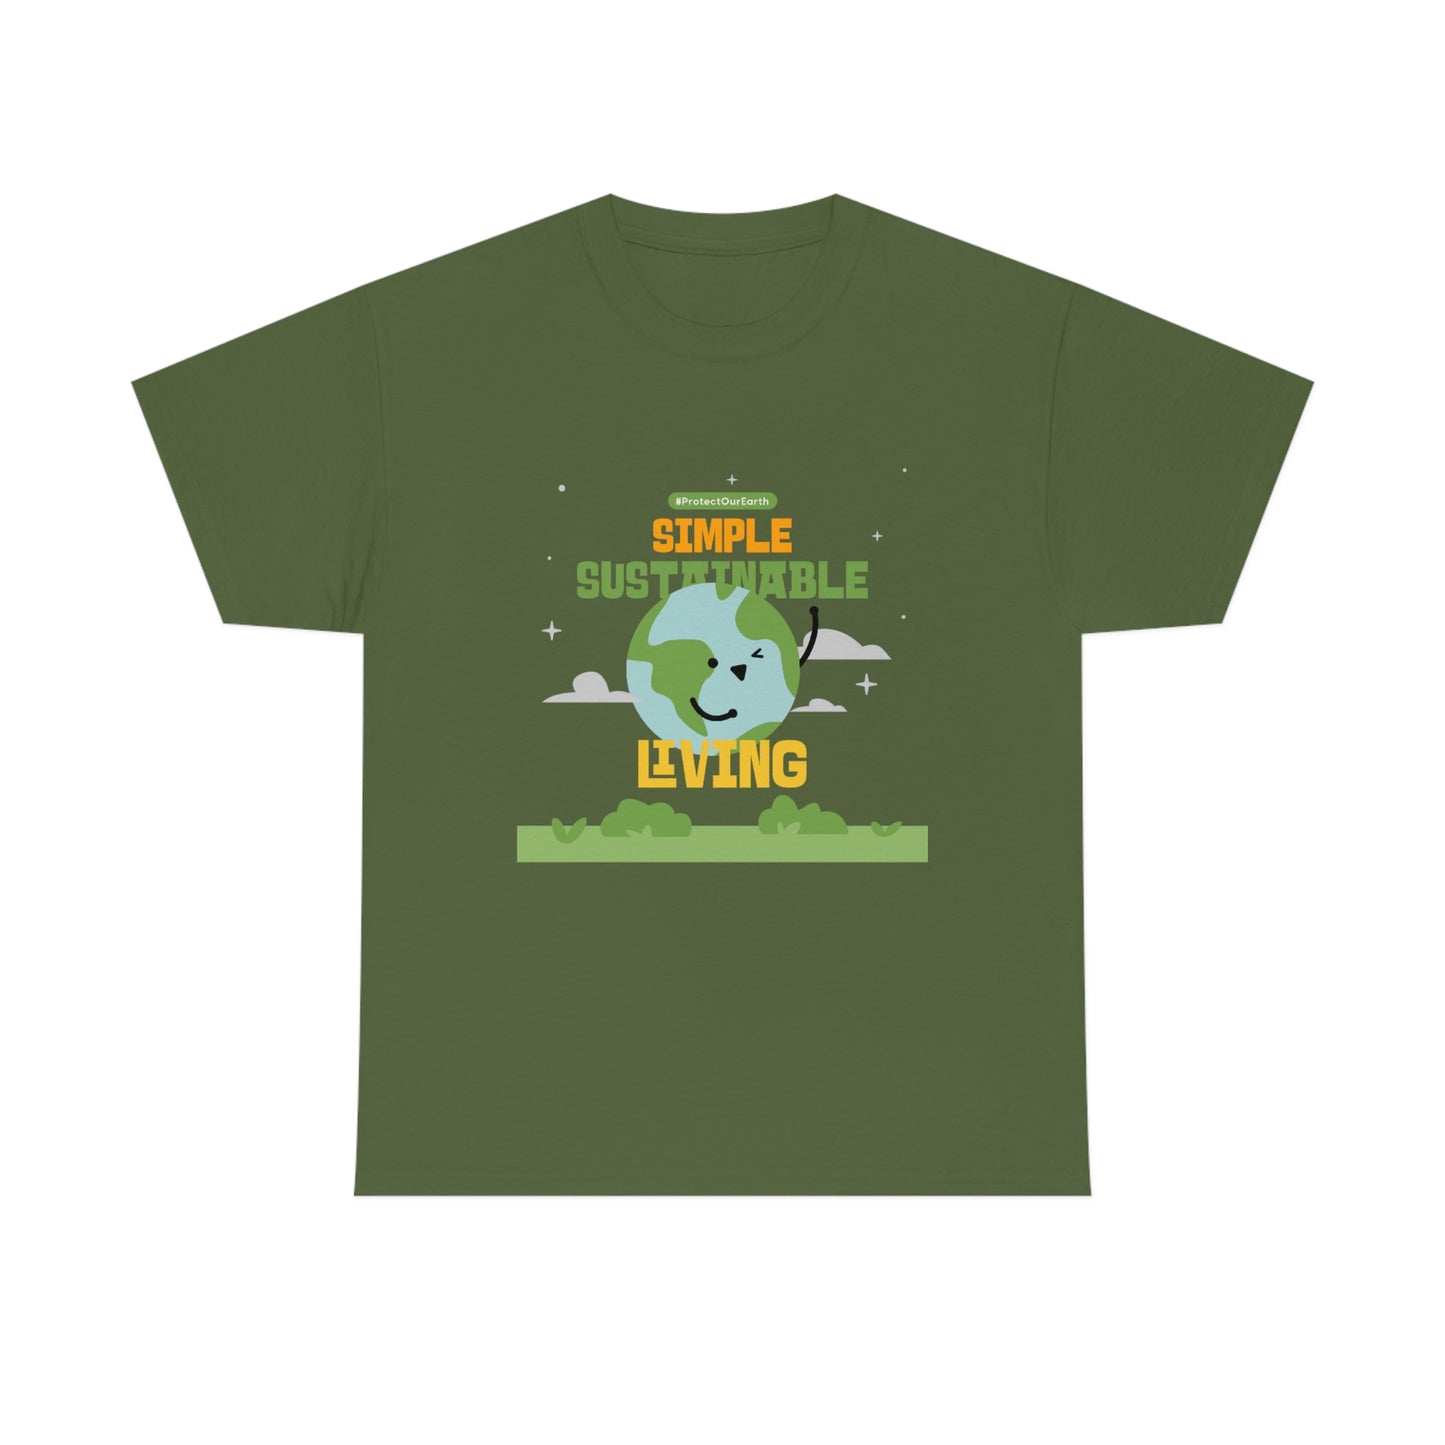 Flat front view of the military green shirt